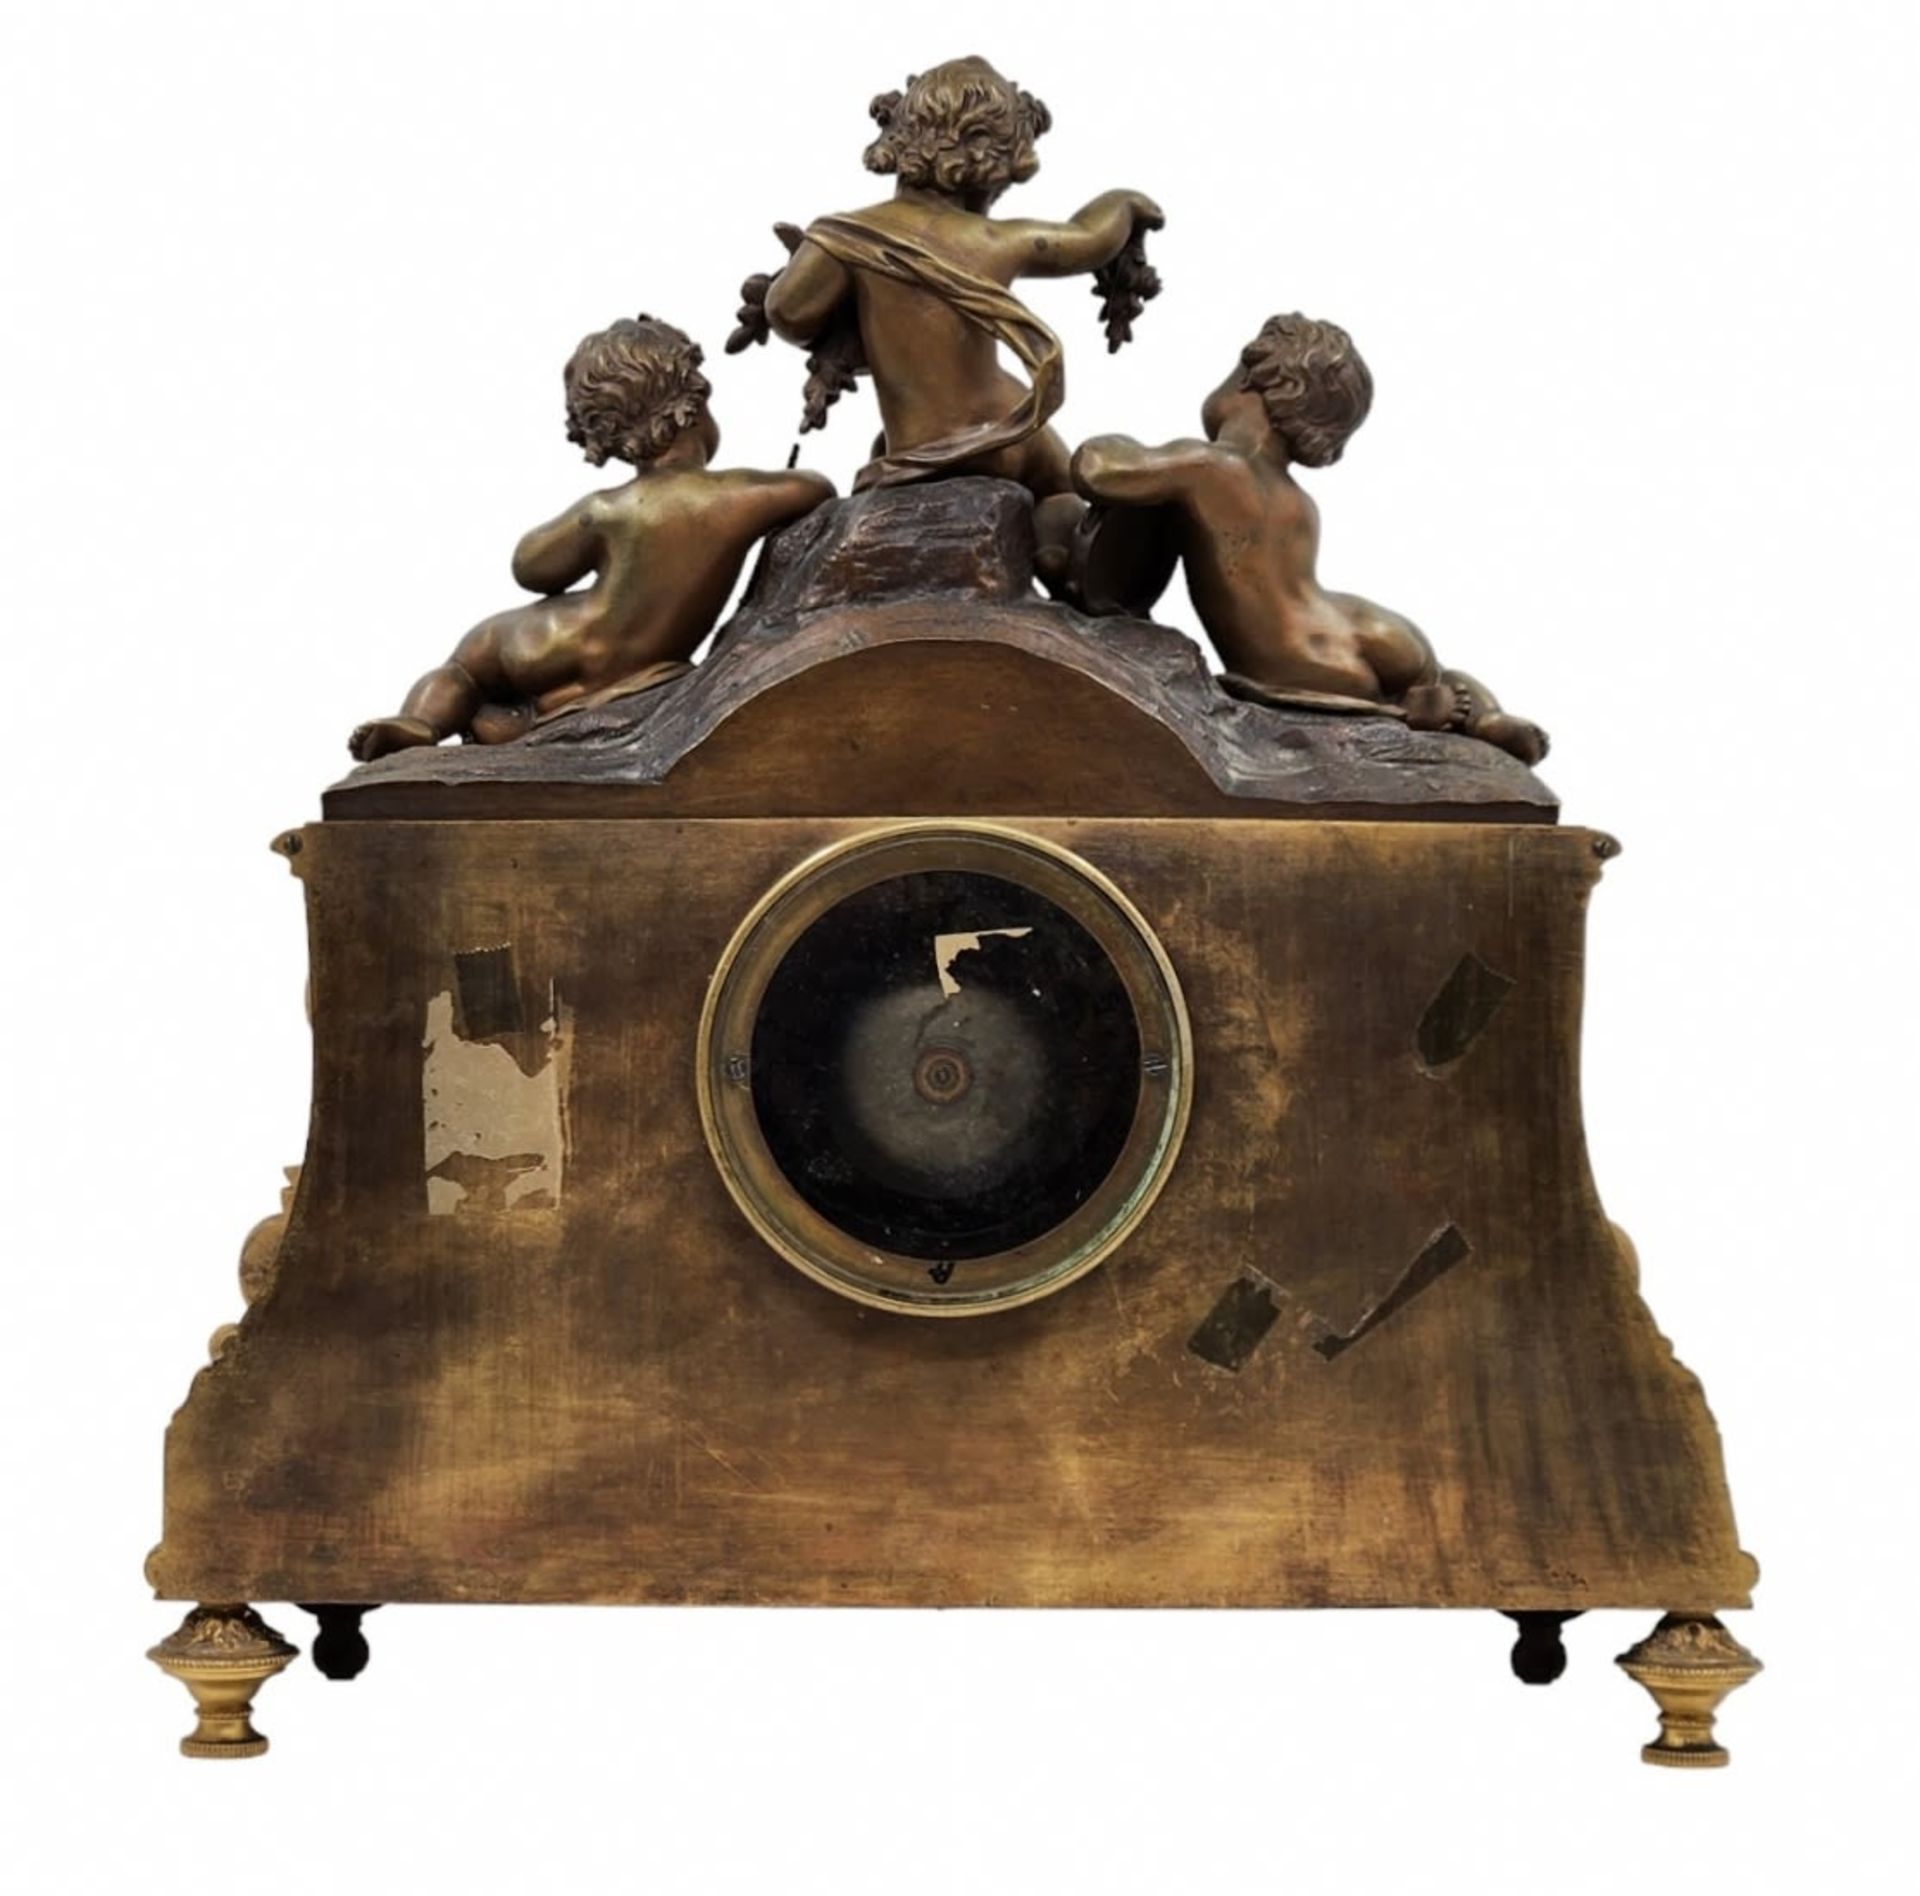 Antique French mantle clock, from the 19th century, made of bronze and white marble, the head is - Image 3 of 19